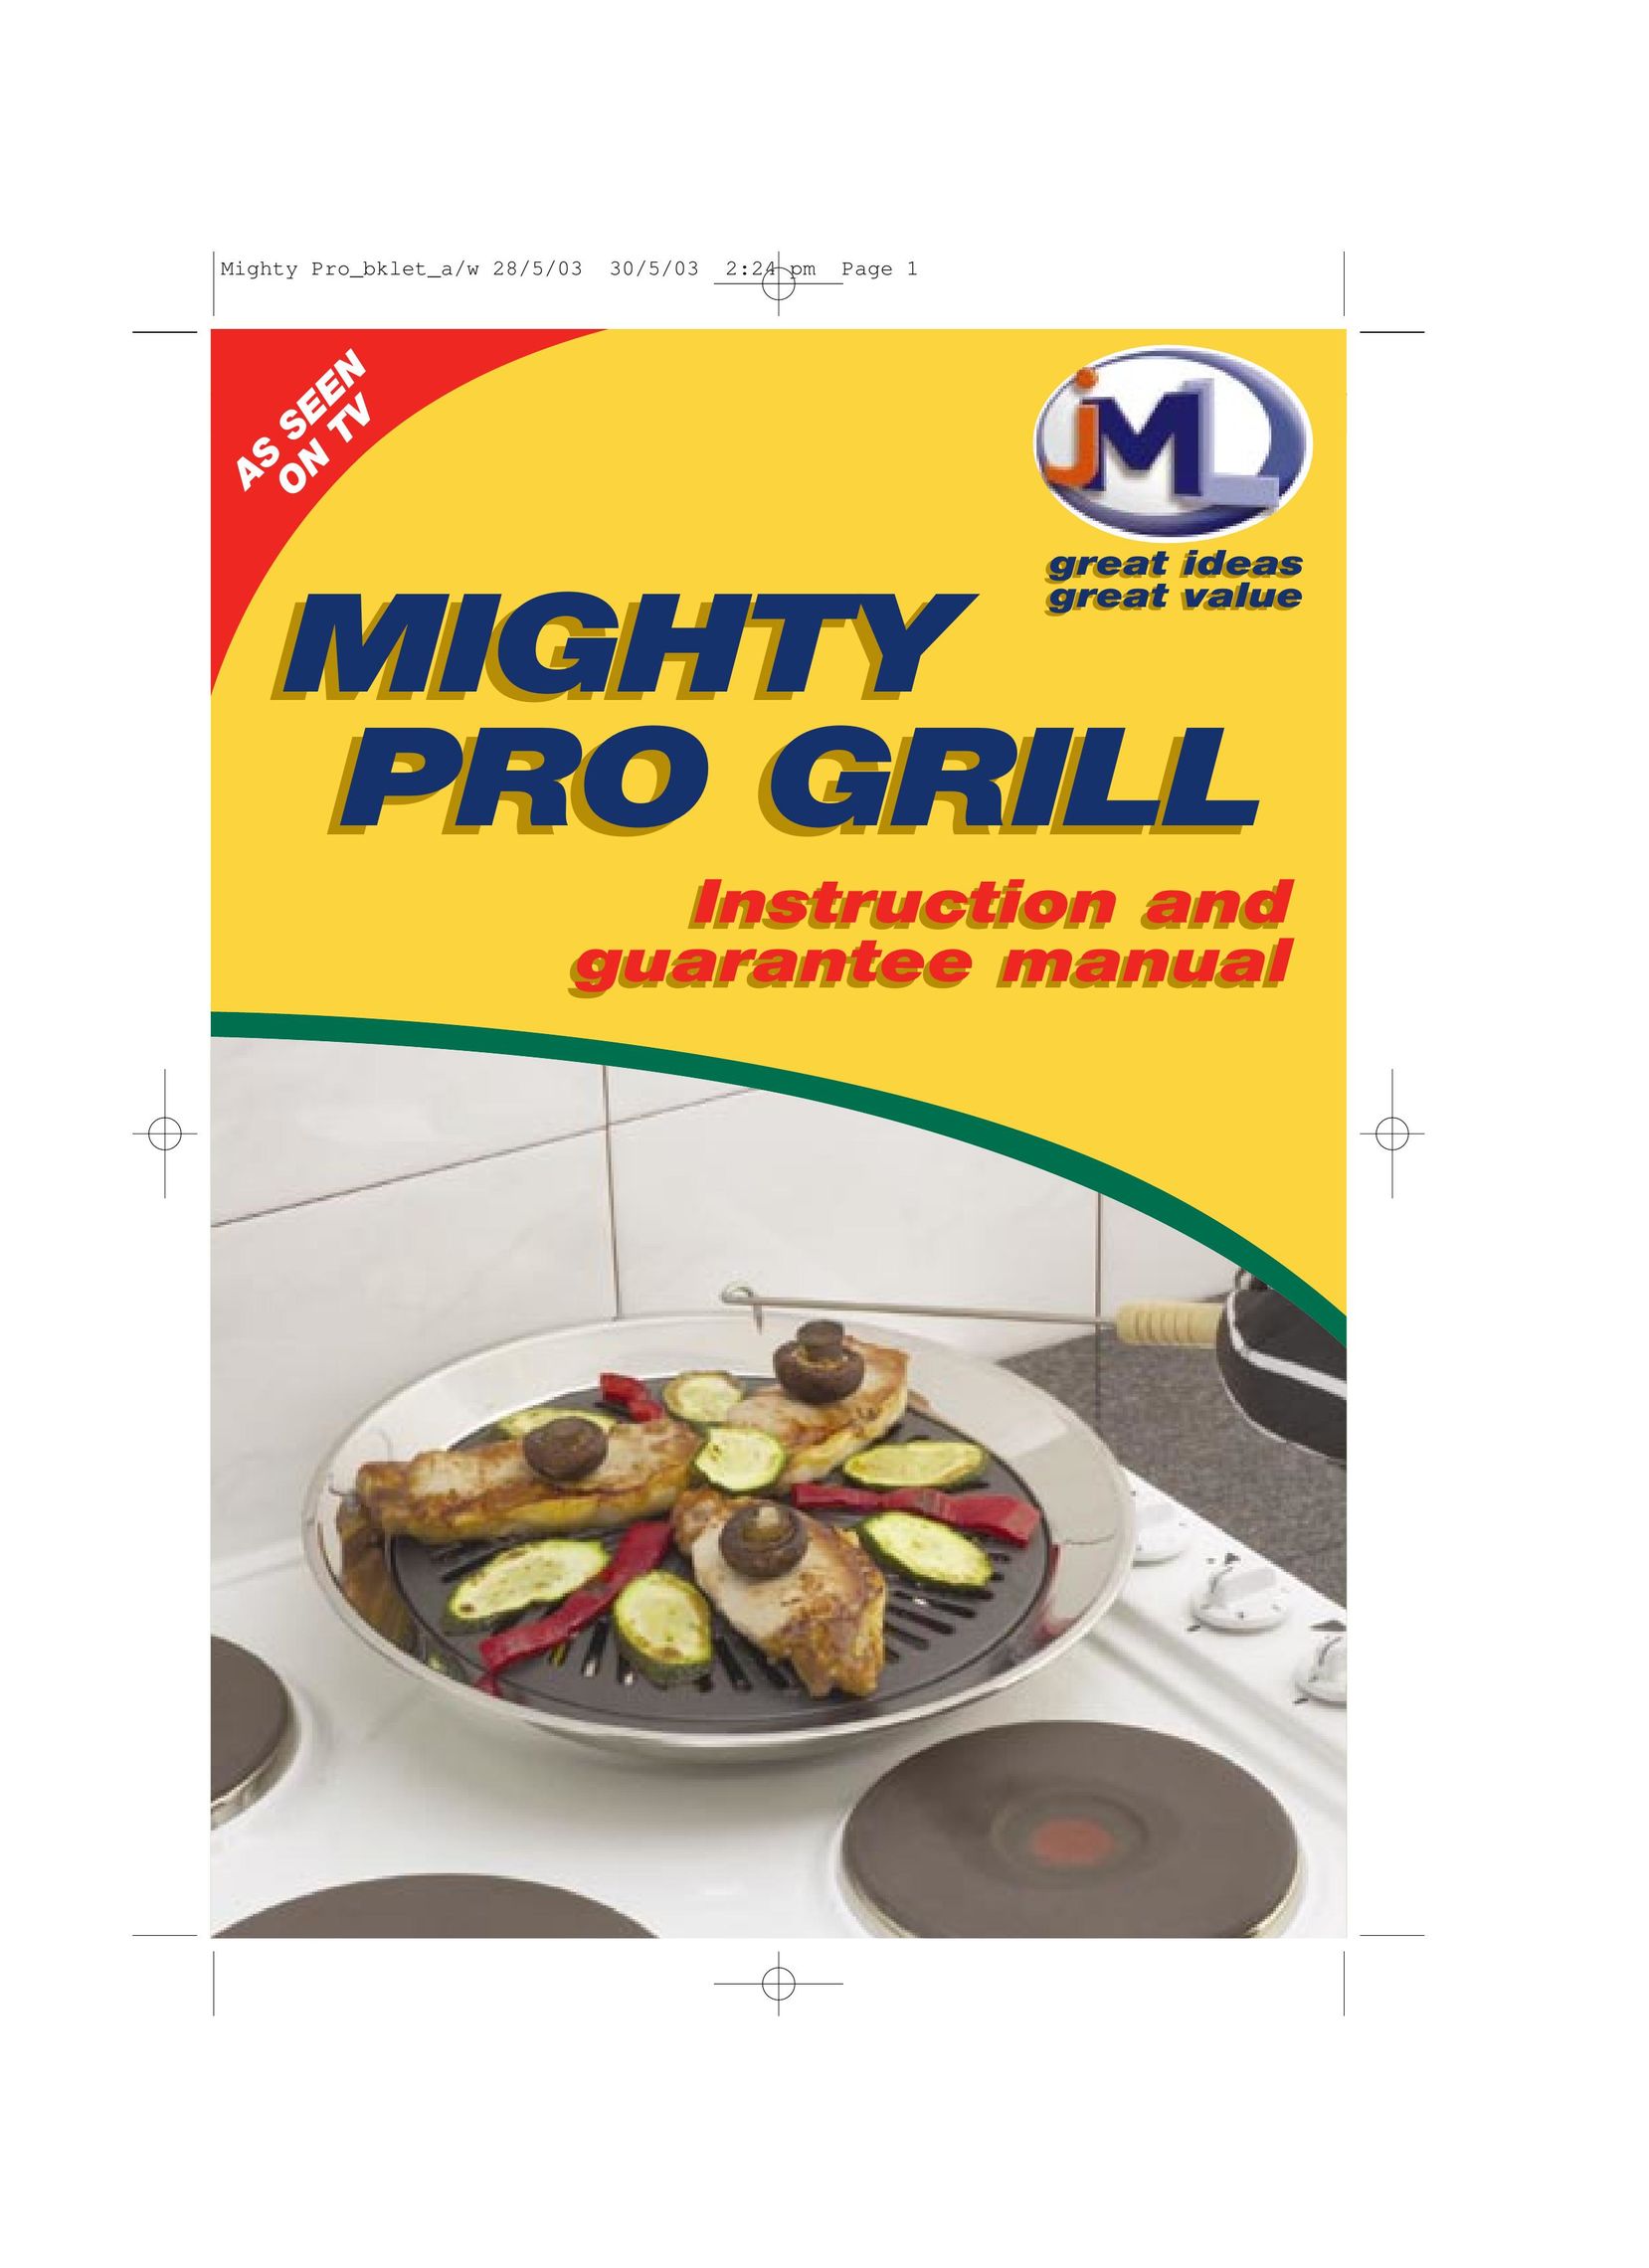 John Mills Mighty Pro Grill Cooktop User Manual